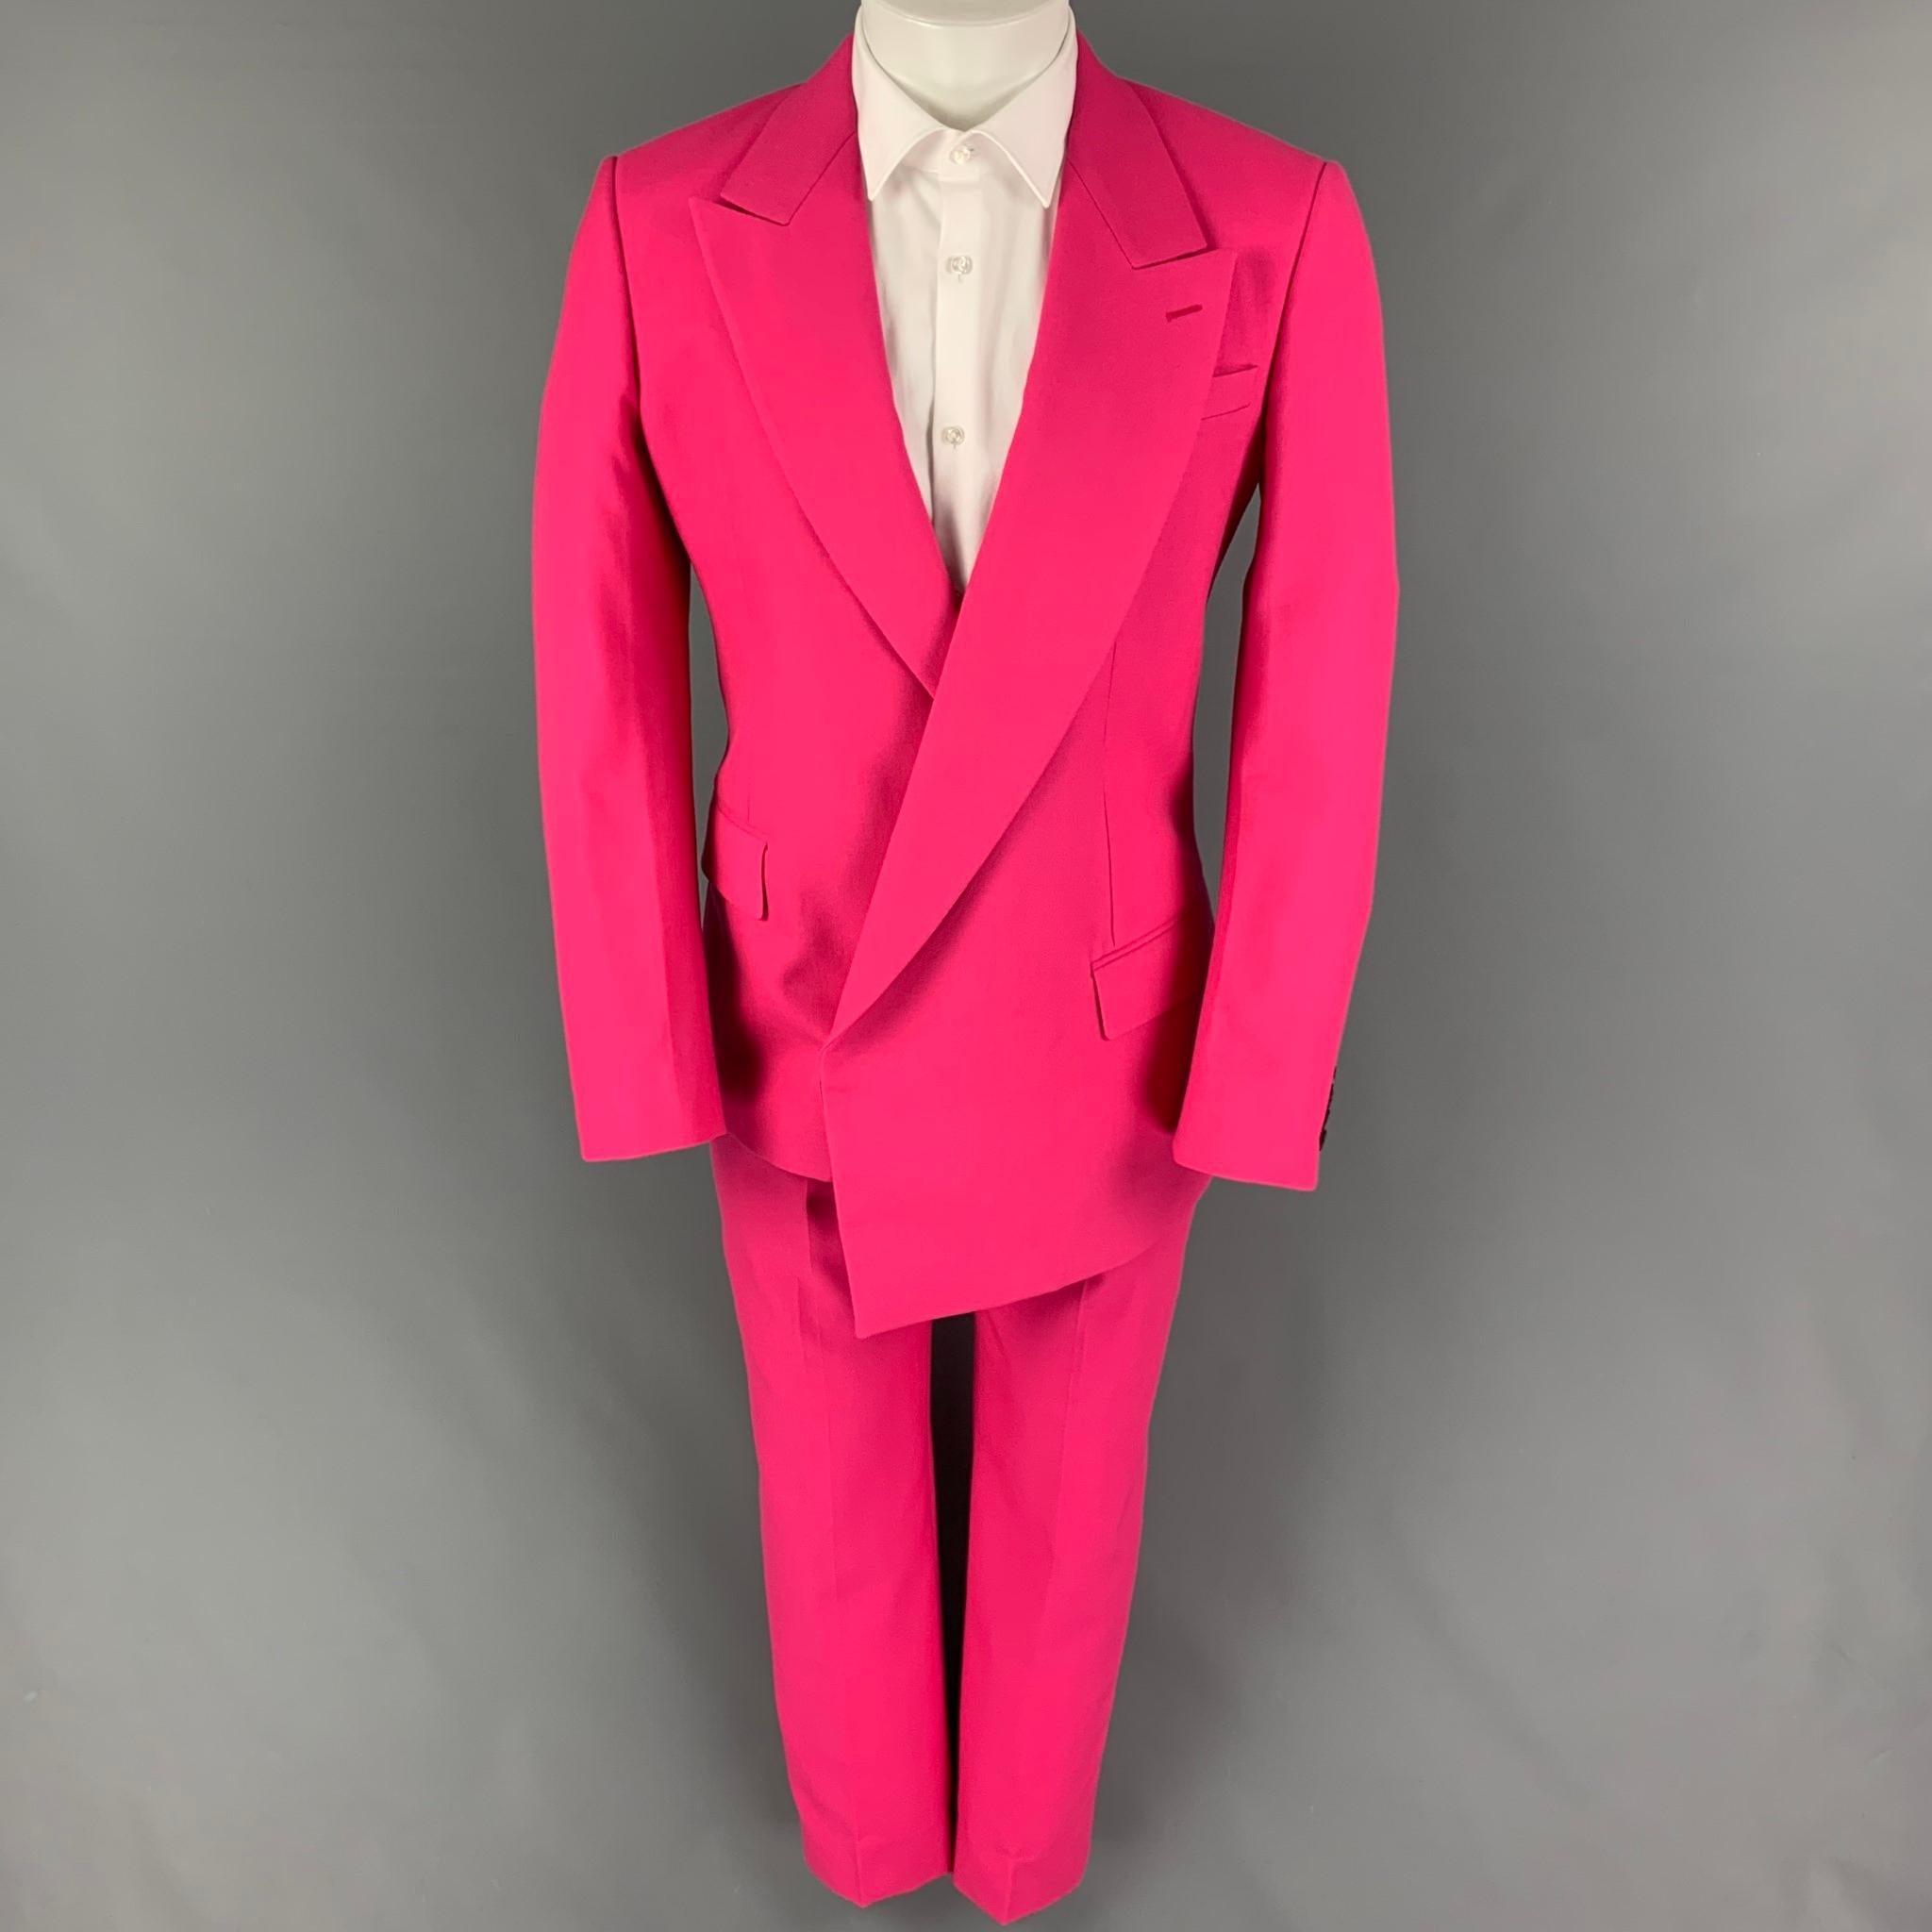 ALEXANDER McQUEEN suit comes in a pink wool with a full liner and includes a single breasted,  asymmetrical double breasted sport coat with a peak lapel and matching flat front trousers. Made in Italy.

New with tags.
Marked: 46
Original Retail